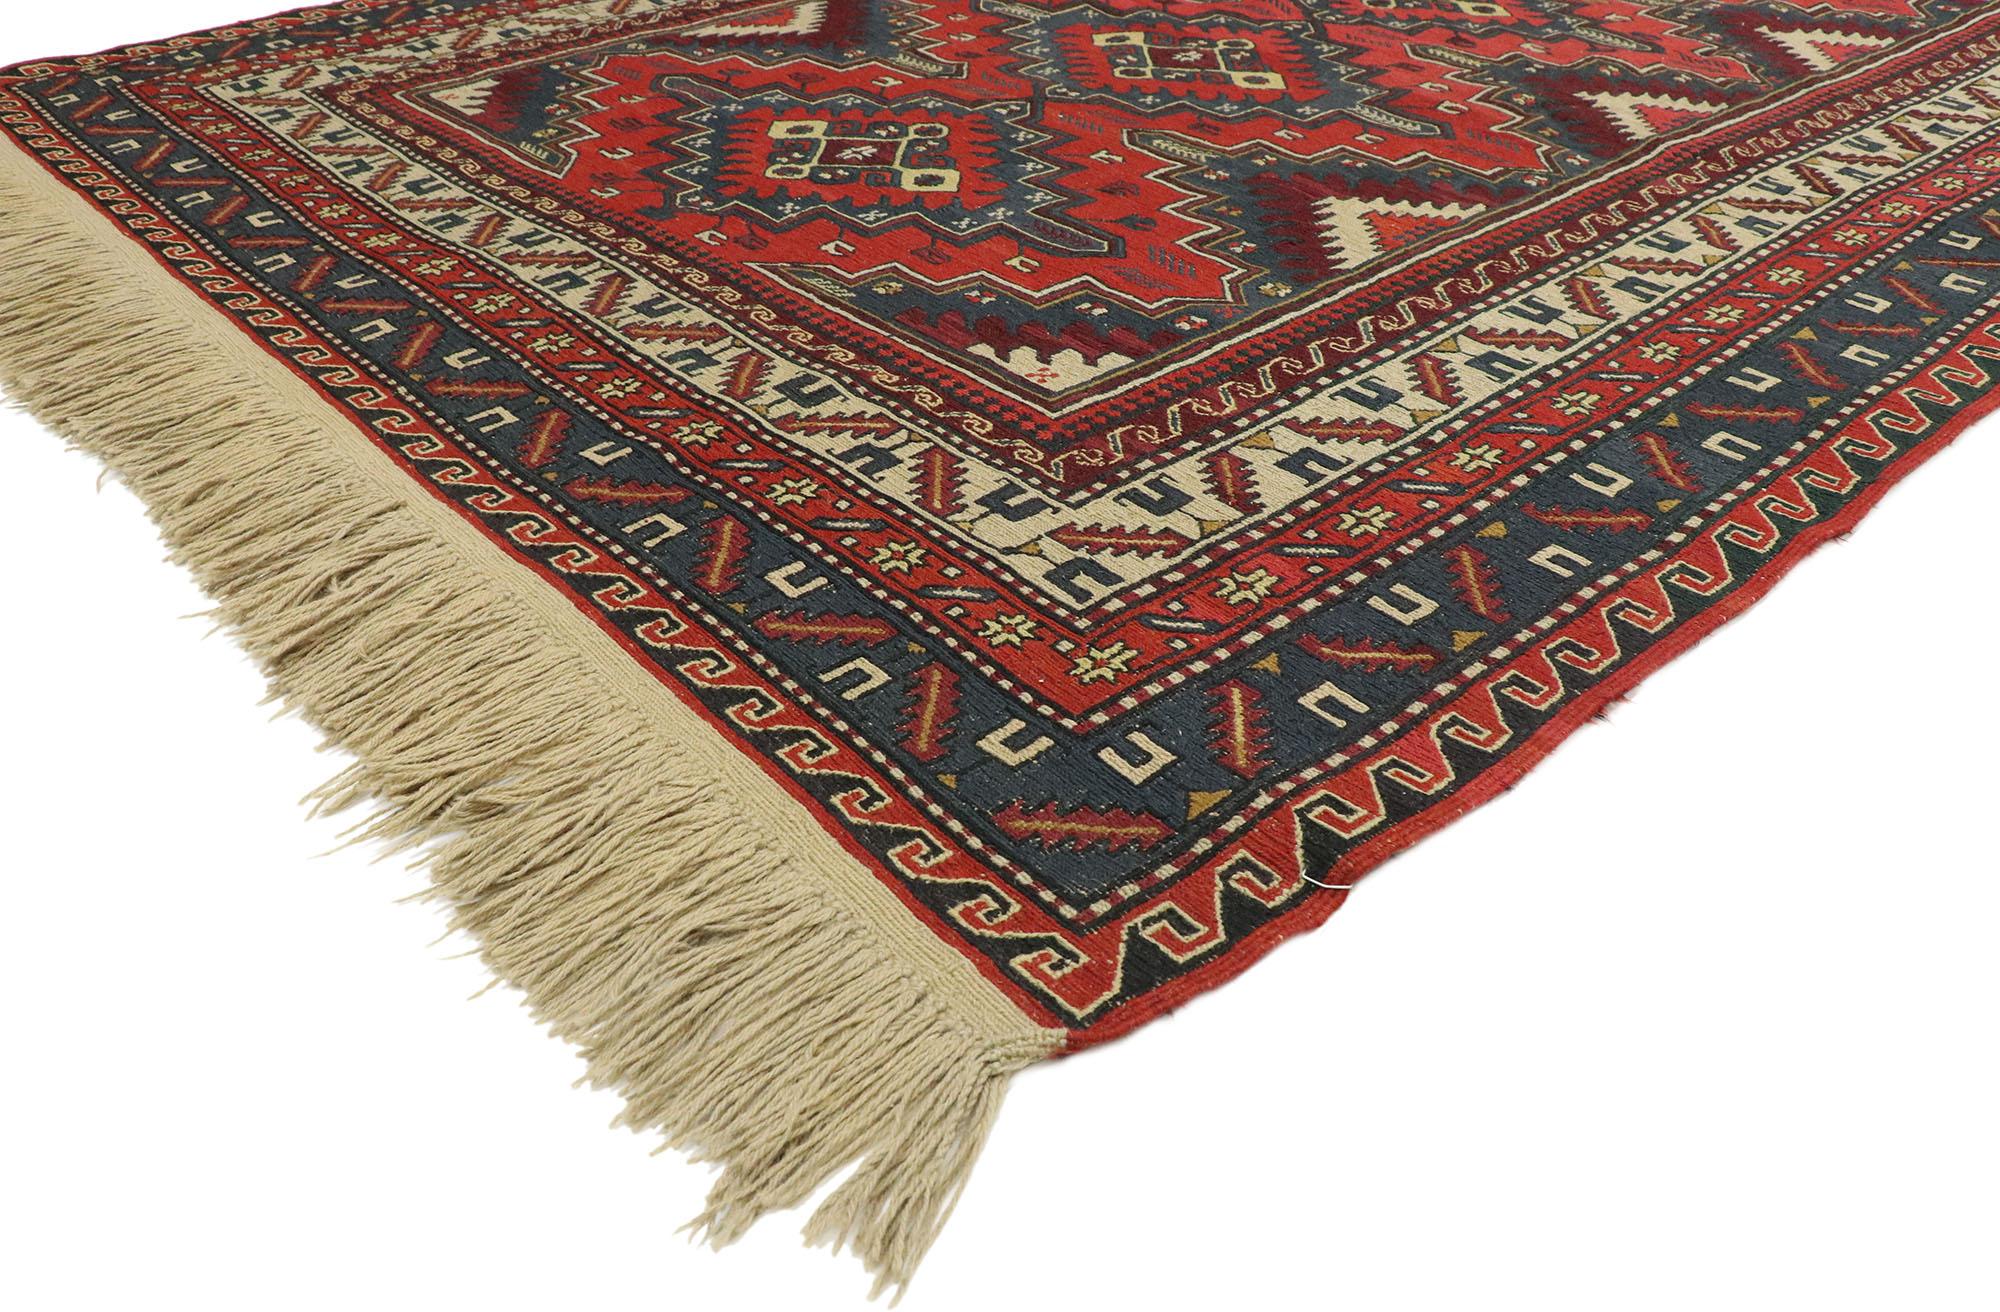 74375, antique Caucasian Soumak rug with tribal style. Embodying tribal style and nomadic charm with saturated colors, this handwoven wool antique Caucasian Soumak rug is a captivating vision of woven beauty. This handwoven wool antique Caucasian